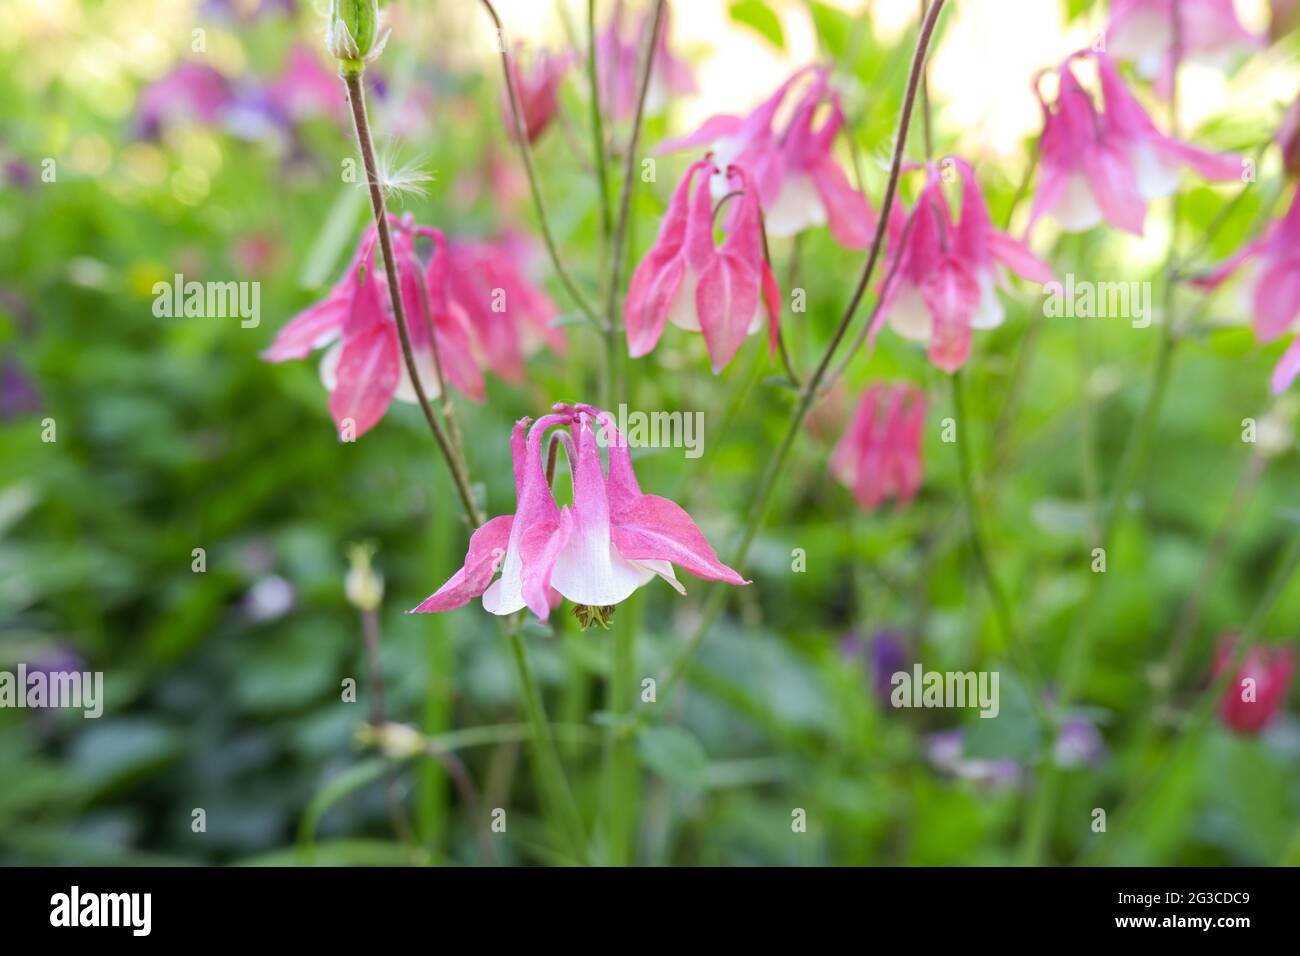 Pink flowers. Aquilegia, columbine flowers with pink, white petals Stock Photo